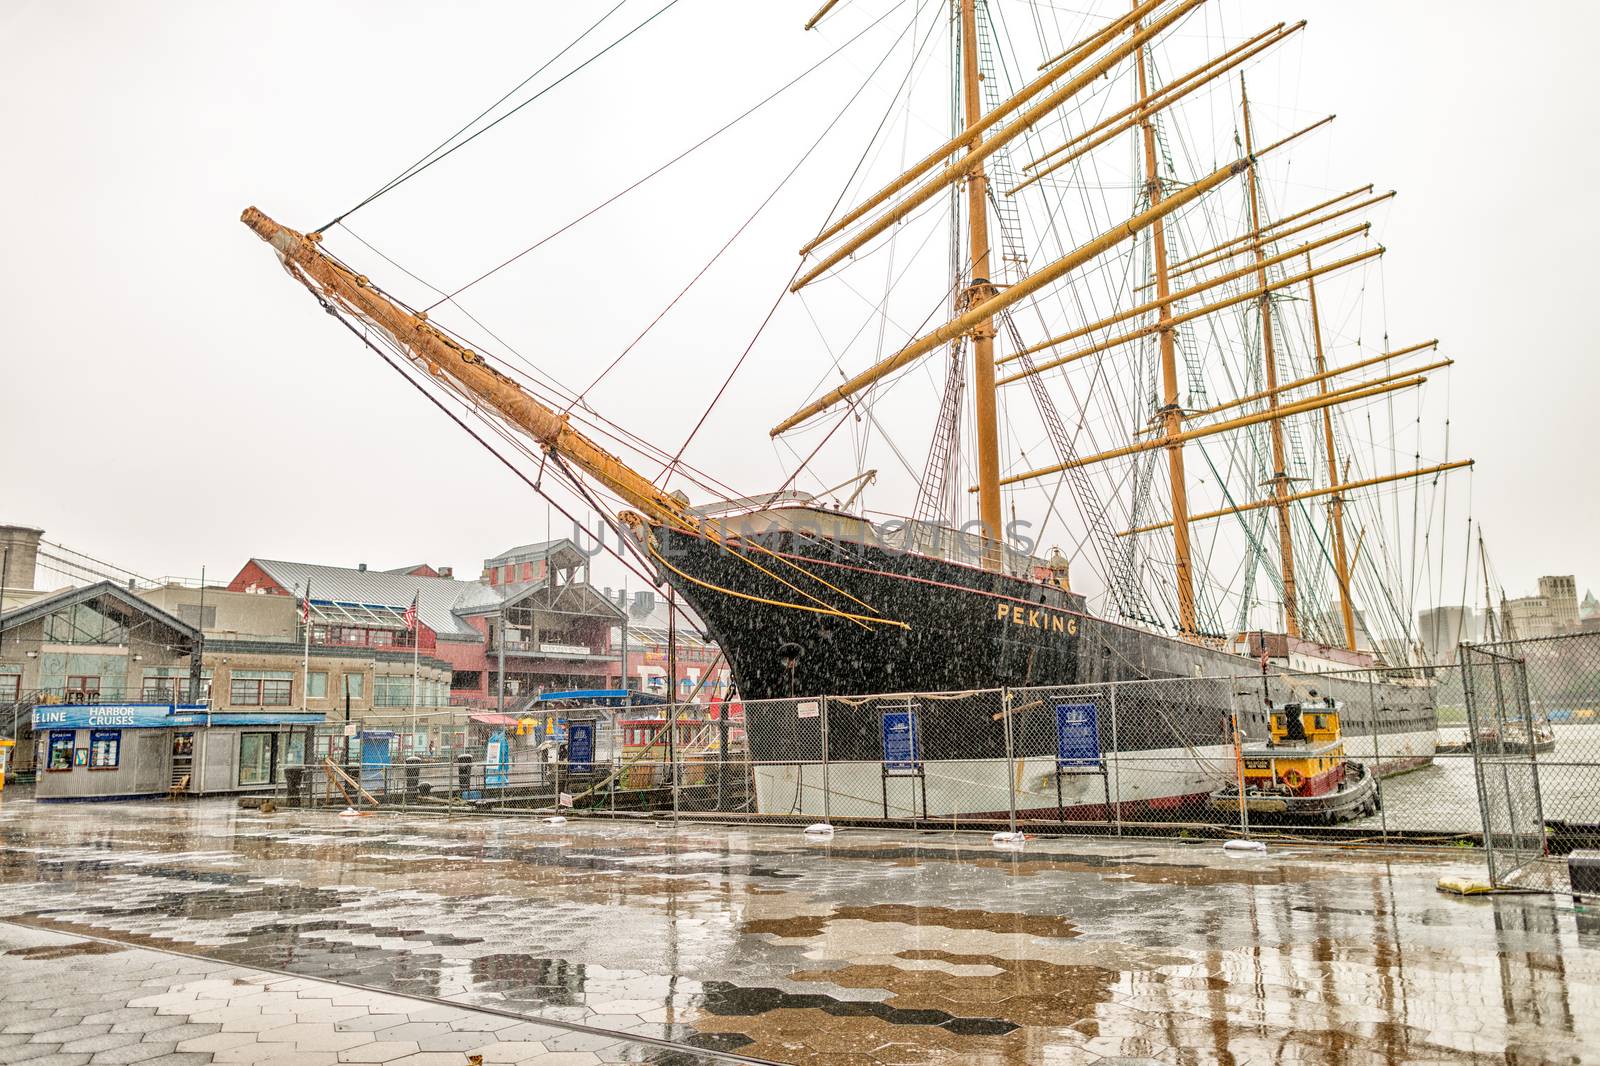 NEW YORK CITY - MAY 22, 2013: Ships in New York South Street Sea by jovannig